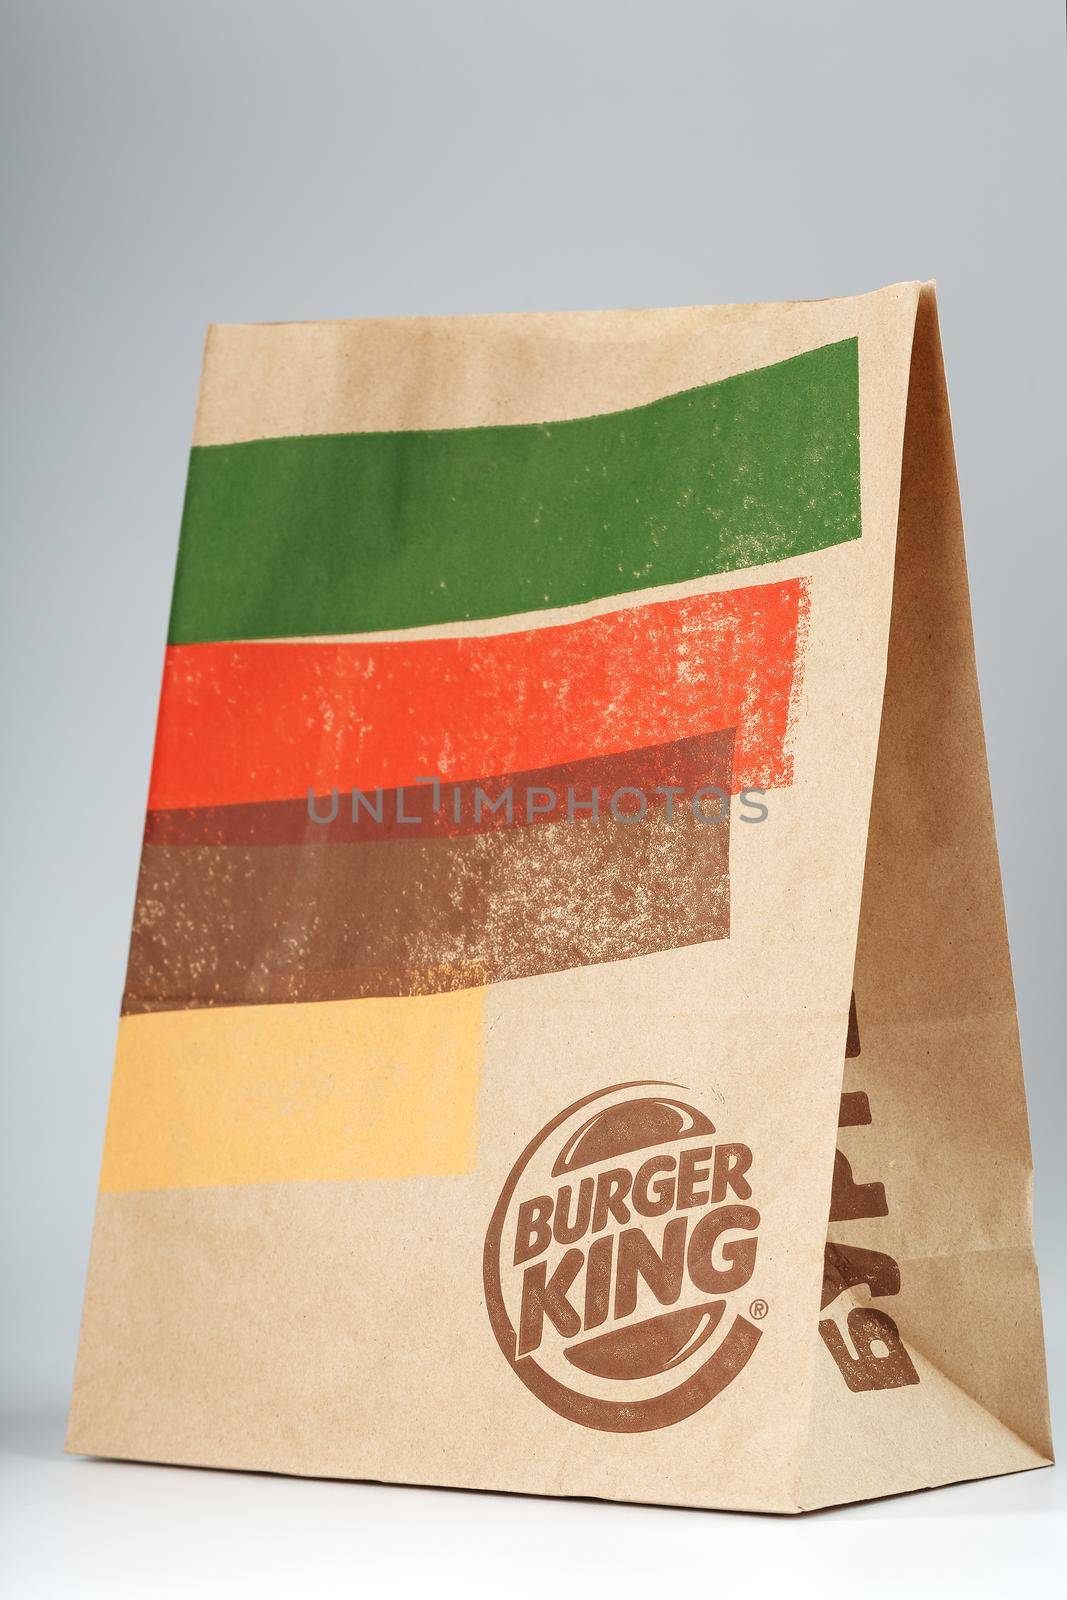 Russia, Moscow - May 17, 2021: Paper packaging with an order from Burger King on a white background. Burger King is a global fast food hamburger chain with headquarters worldwide.